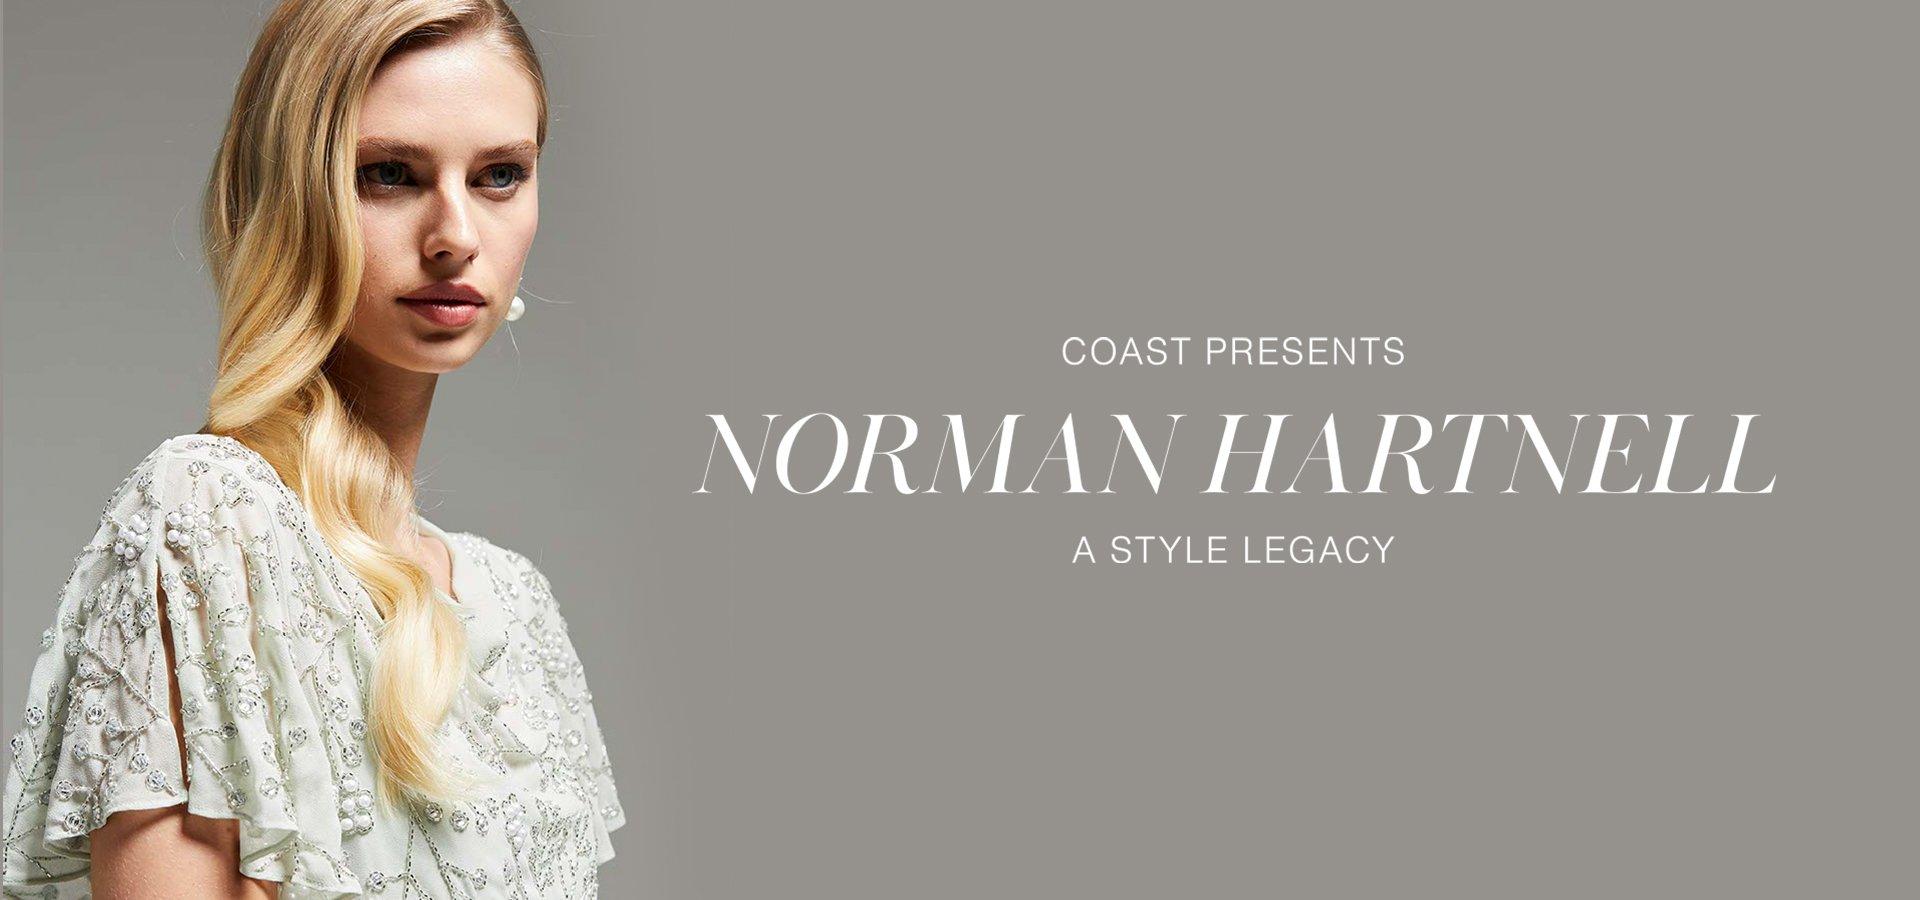 Coast x Norman Hartnell: A Style Legacy